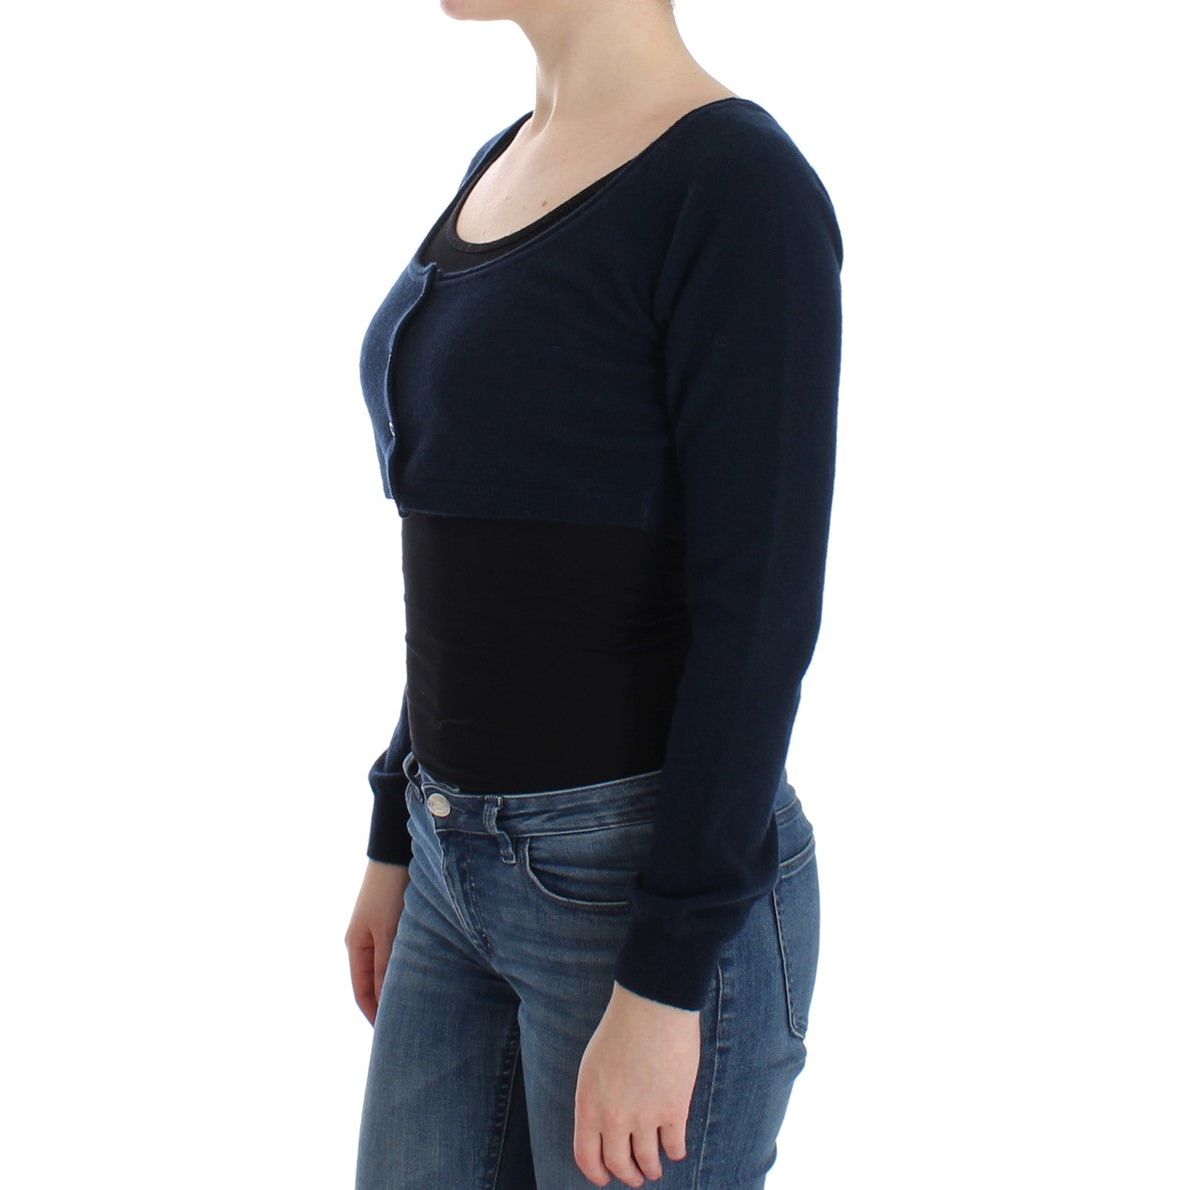 Ermanno Scervino Chic Cashmere-Blend Cropped Sweater in Blue blue-cashmere-cardigan-sweater